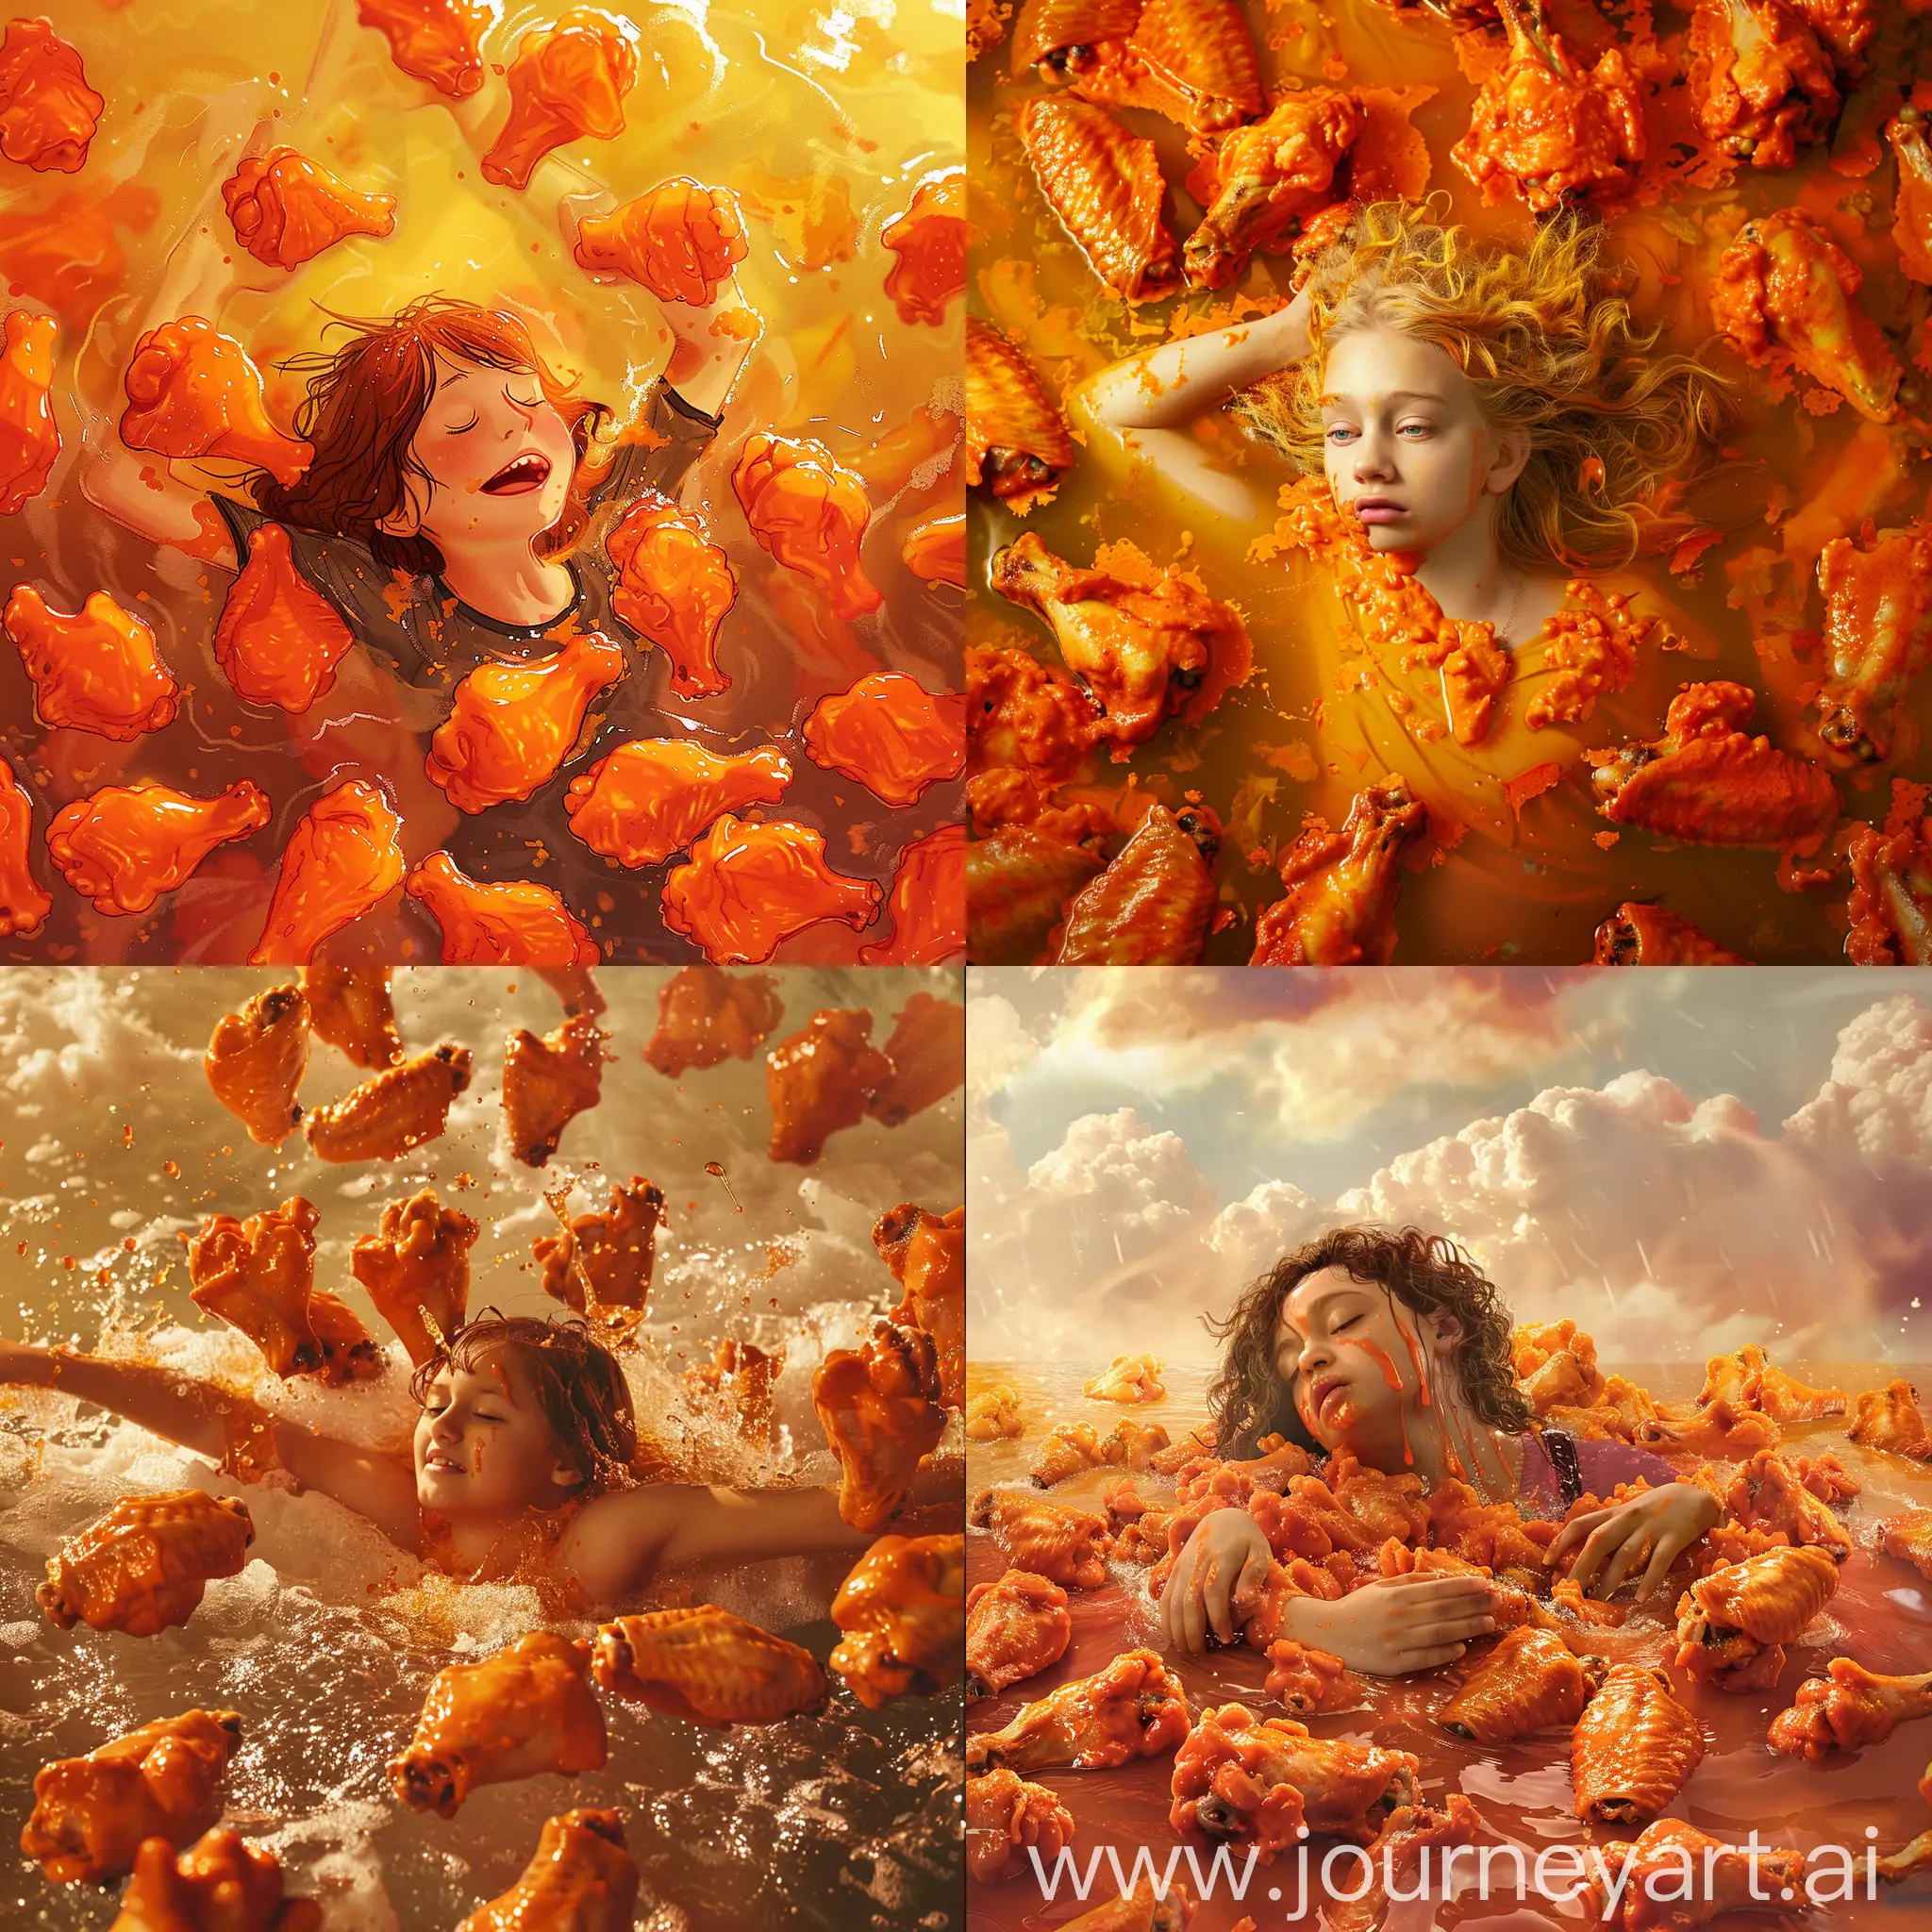 A girl drowning in a sea of buffalo chicken wings